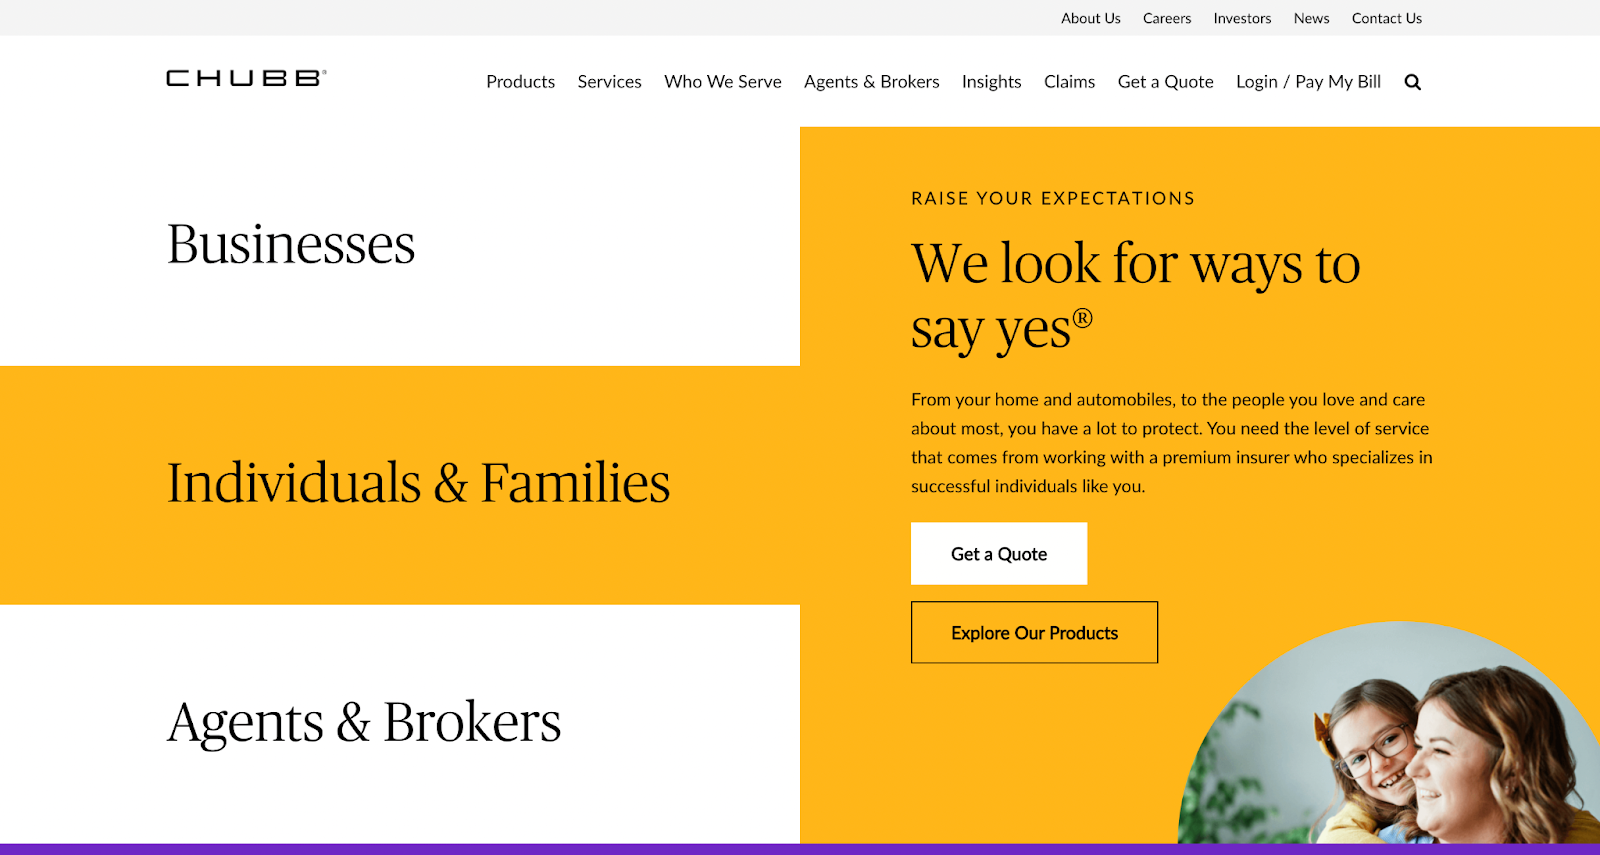 Insurance website design, example from Chubb Insurance